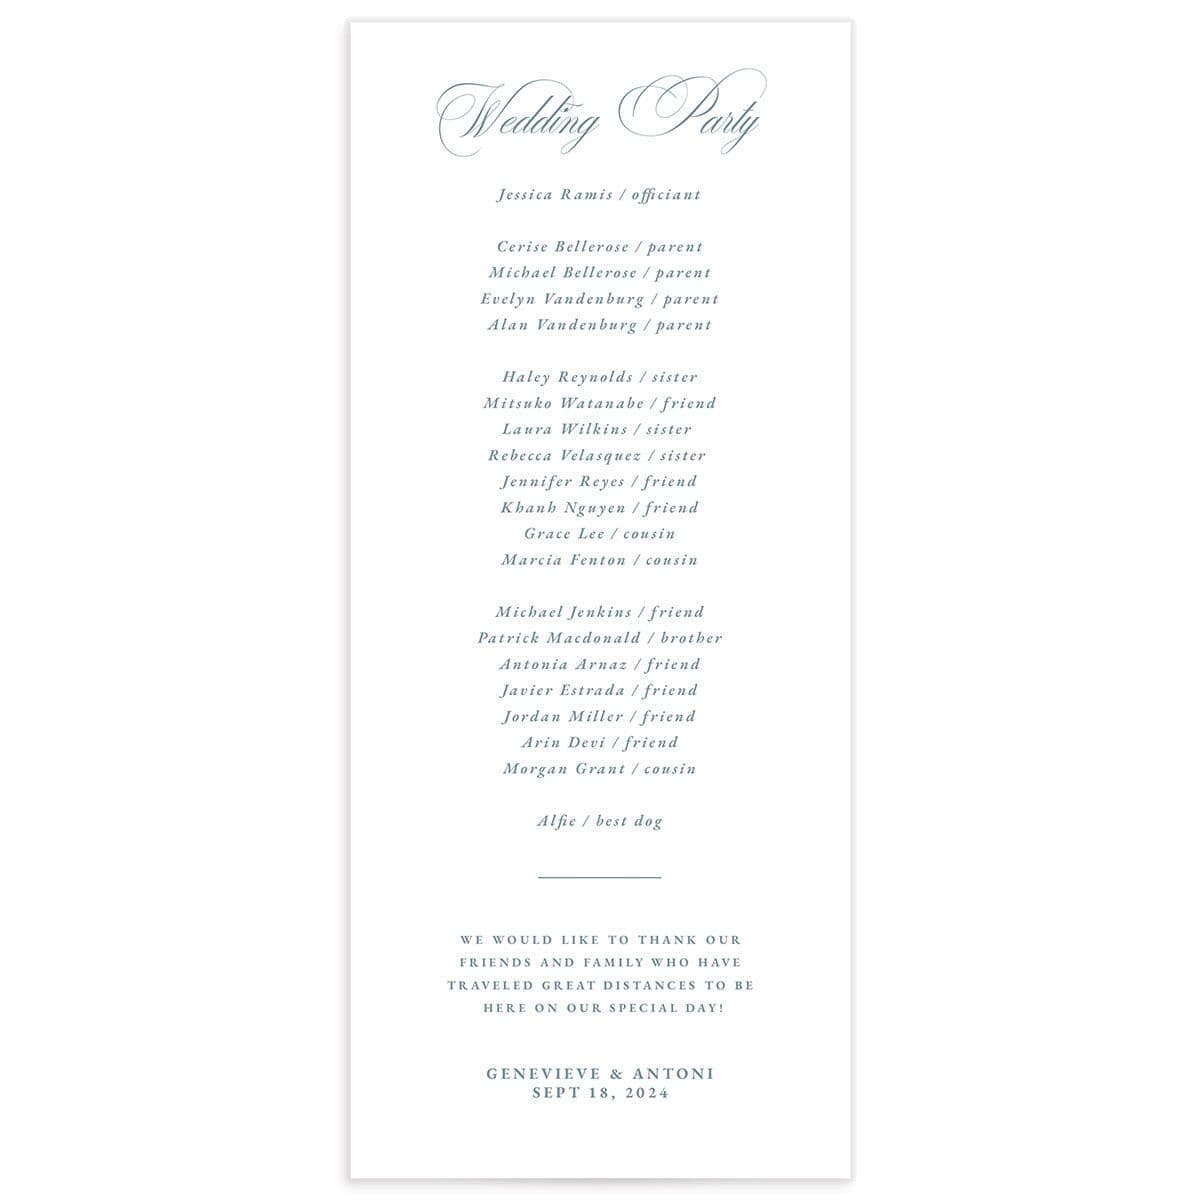 Refined Photograph Wedding Programs back in white